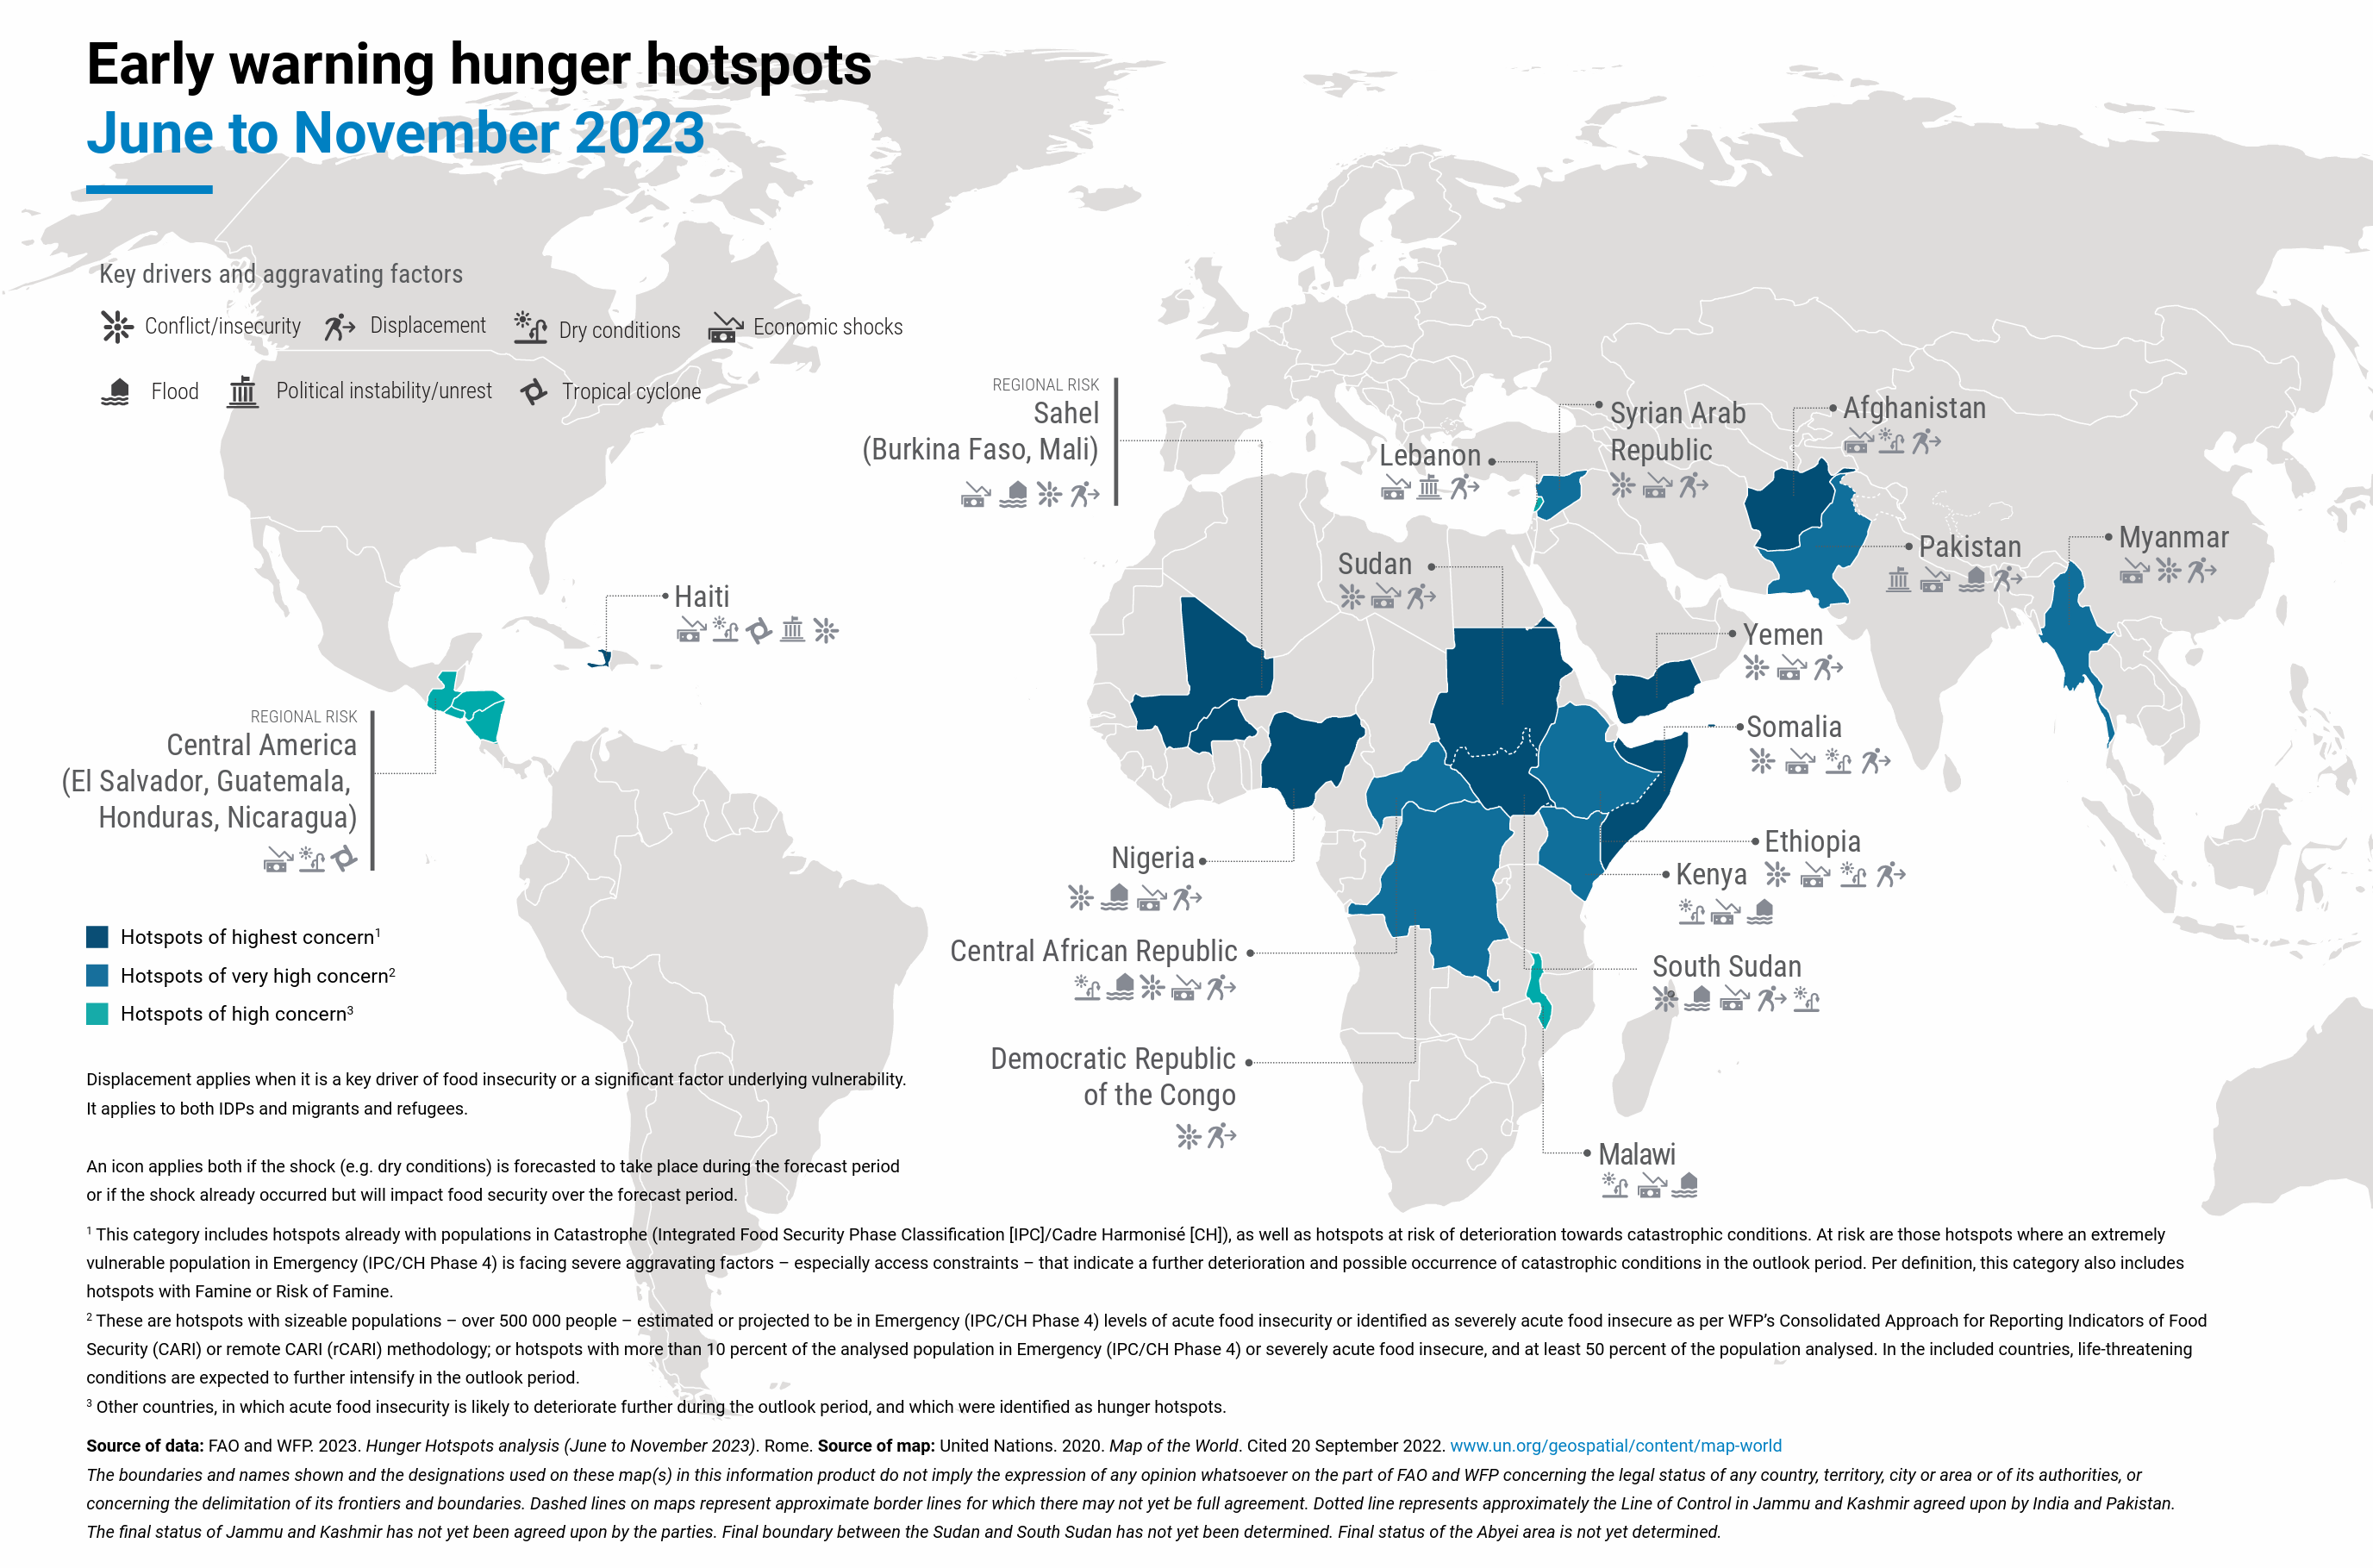 Map showing early warning hunger hotspots, June-November 2023. Hunger was set to worsen in 18 “hotspots” worldwide including Sudan, where fighting put people at risk of starvation, the Food and Agriculture Organization (FAO) and the World Food Programme (WFP) warned in a report published on Monday, 29 May 2023. Sudan, Burkina Faso, Haiti, and Mali were elevated to the highest alert level, joining Afghanistan, Nigeria, Somalia, South Sudan and Yemen. Graphic: UN FAO